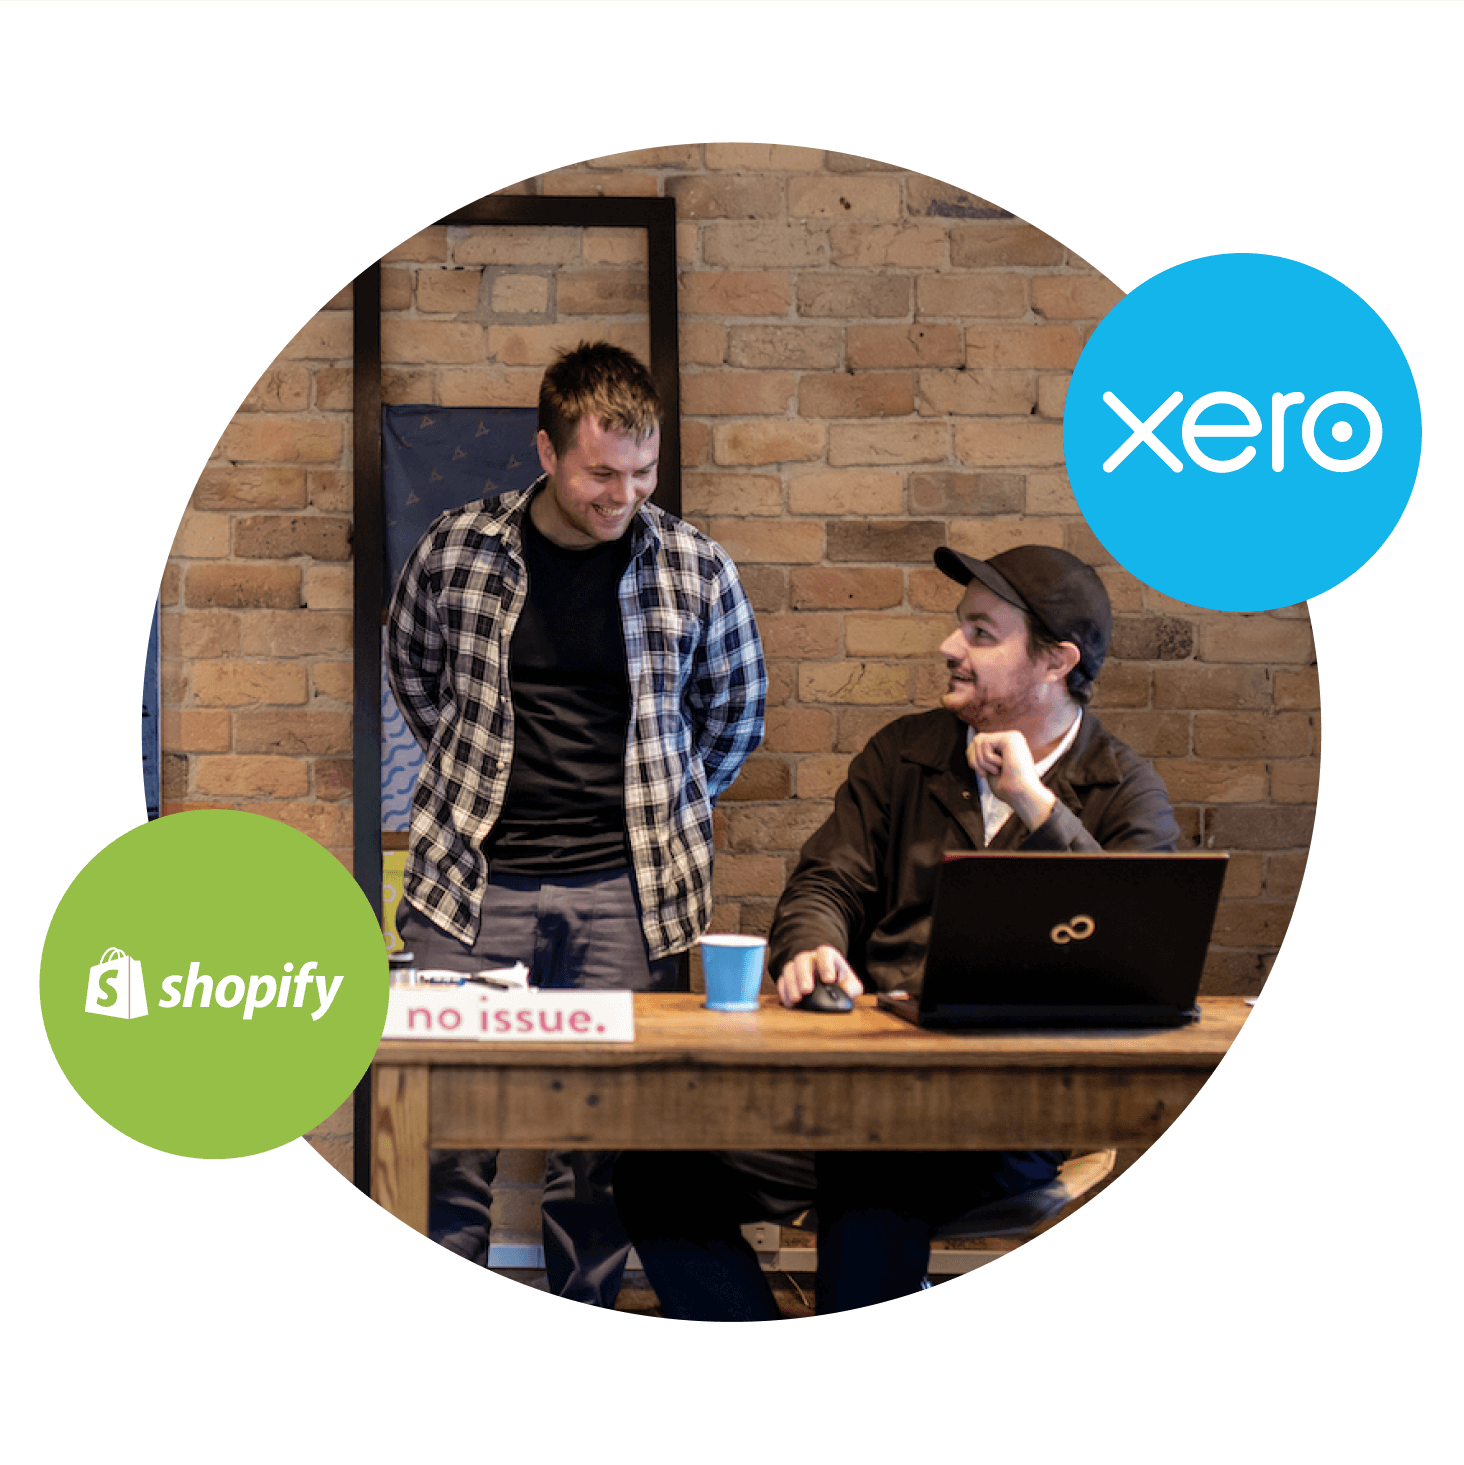 Two South African ecommerce sellers chat about the increase in sales since using Shopify and Xero for their online store.